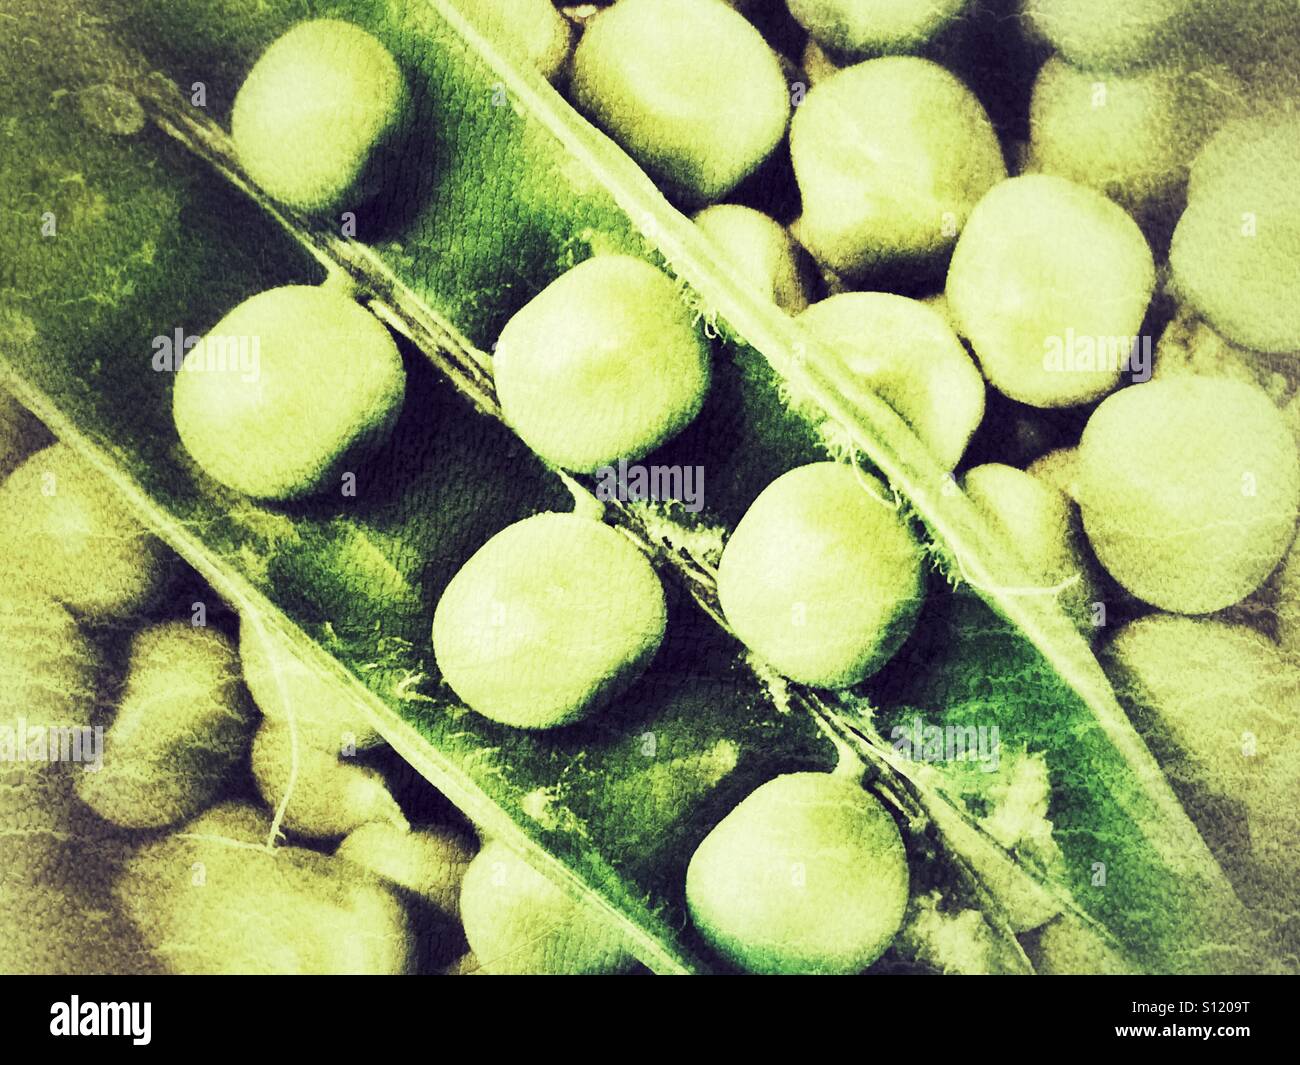 Peas in a pod on top of shelled peas Stock Photo